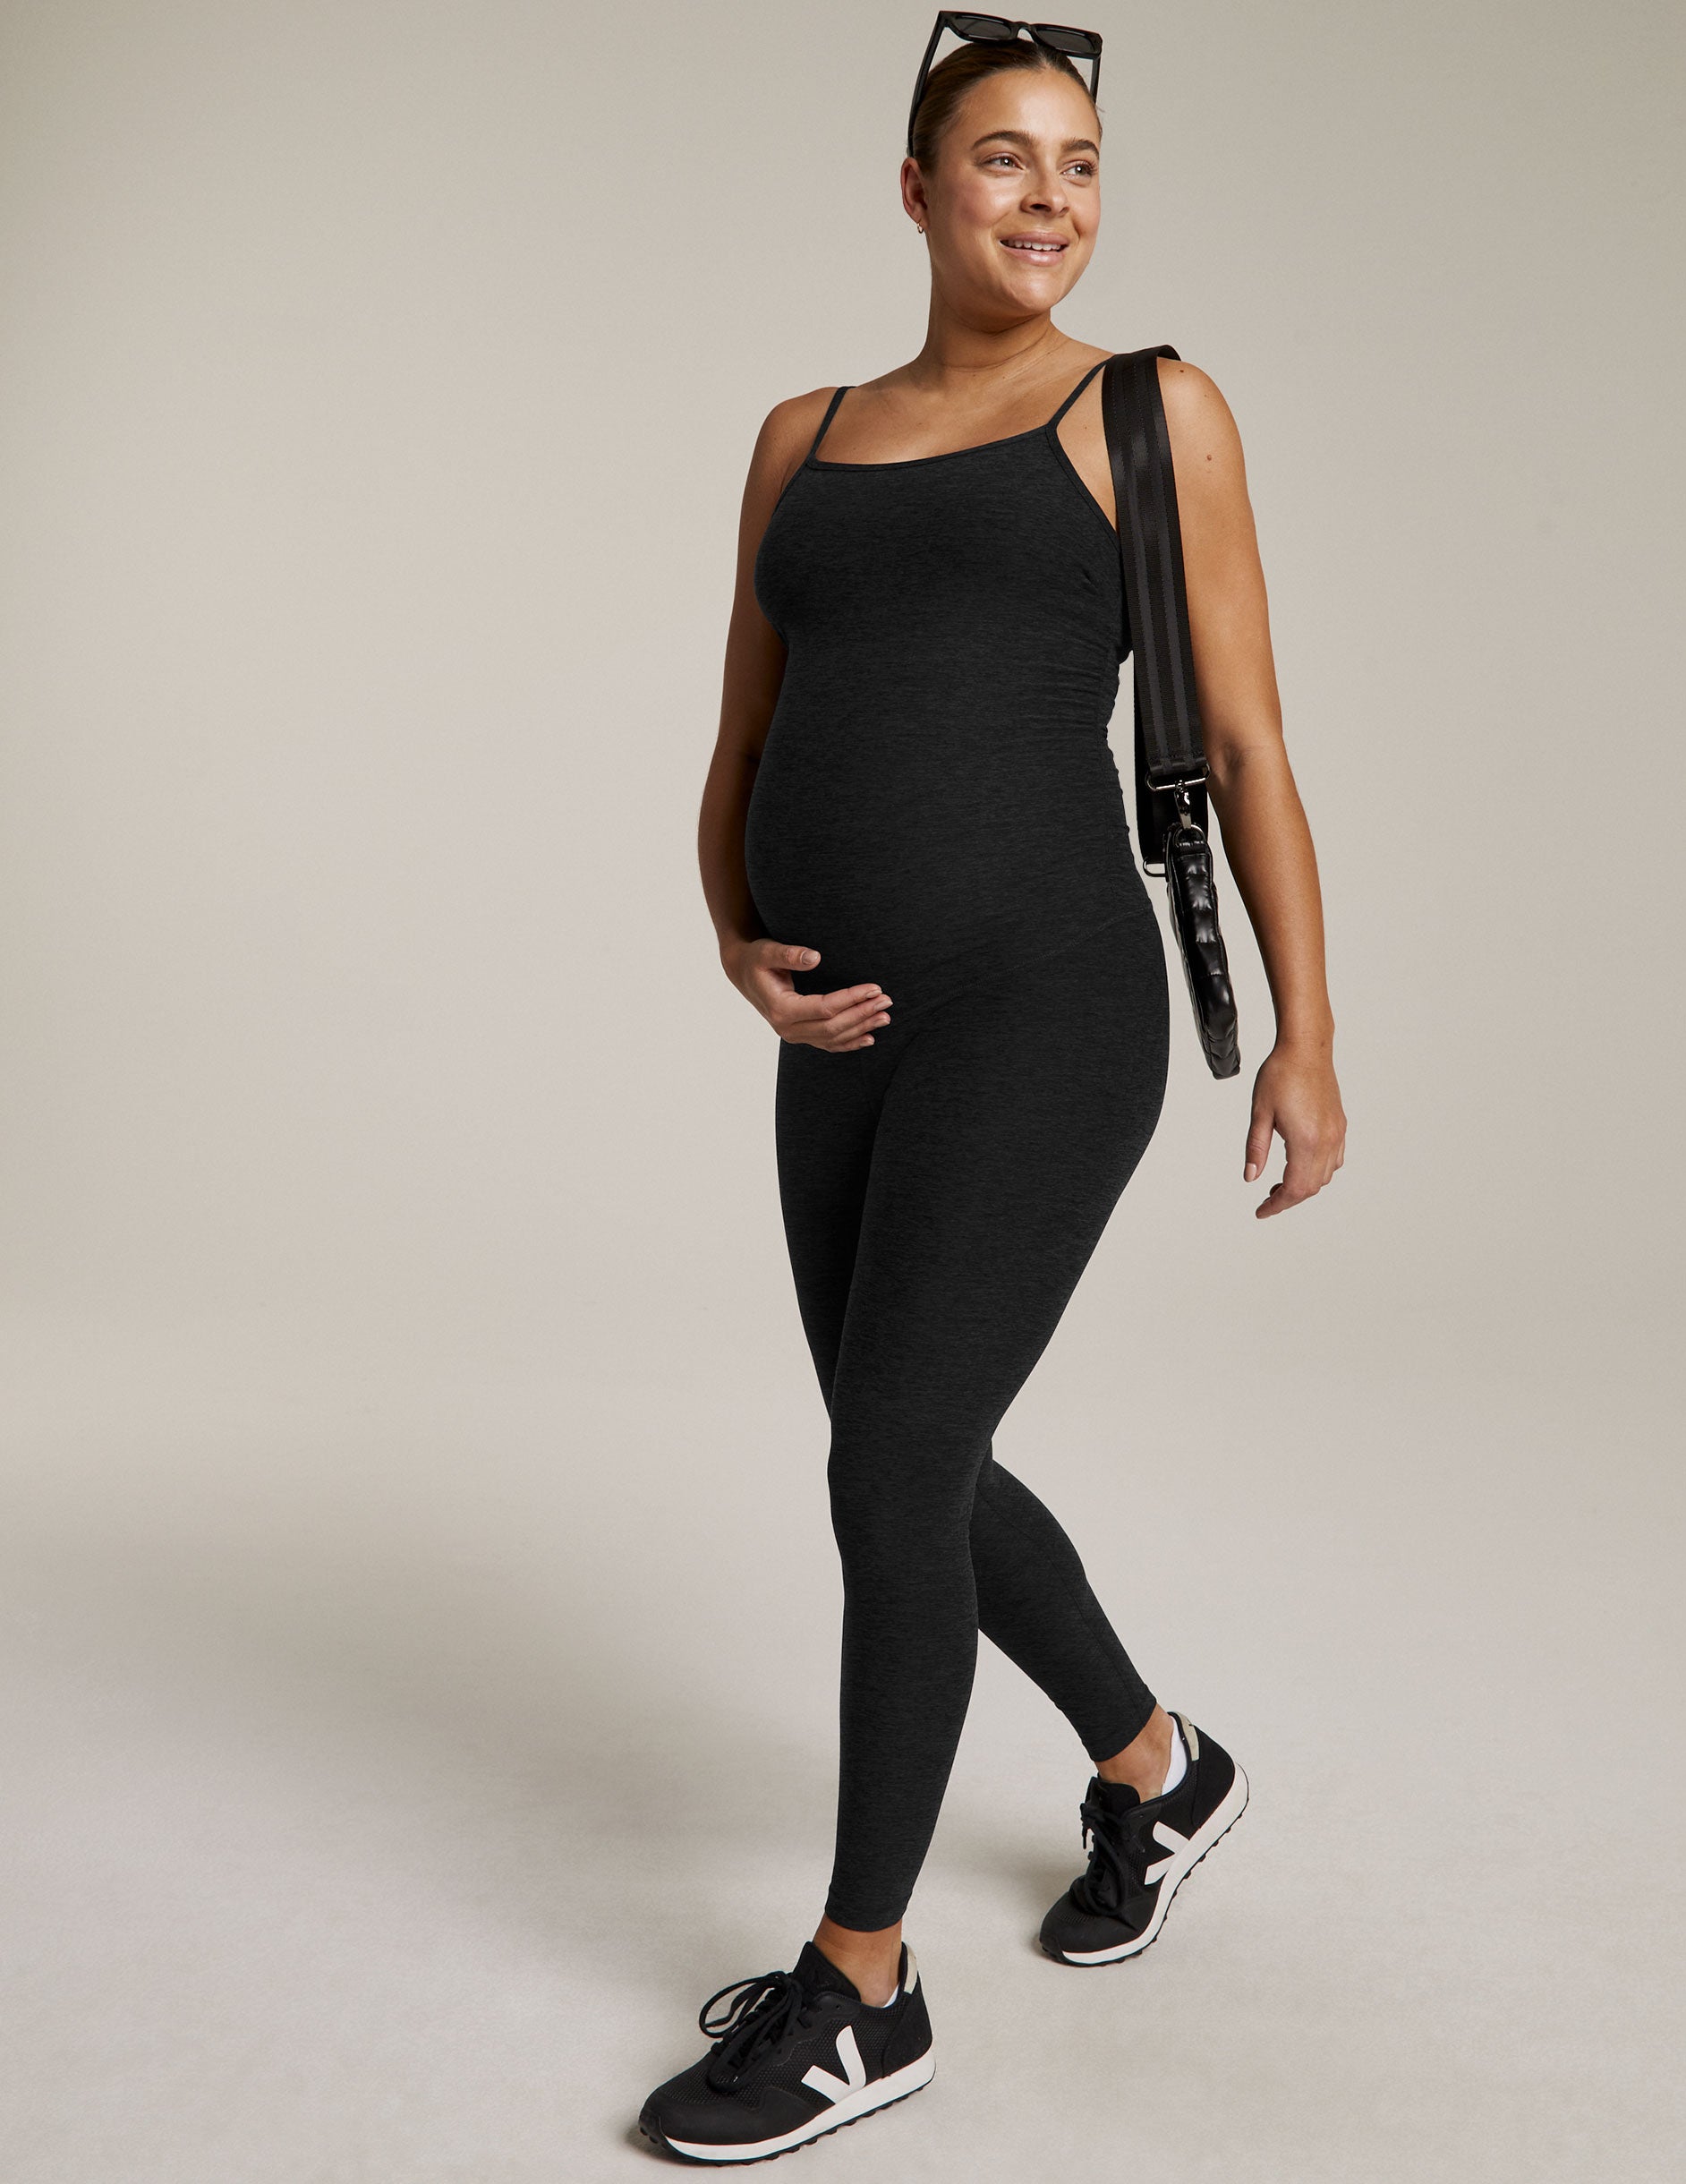 Beyond Yoga Spacedye Uplevel Maternity Jumpsuit For Women - Adjustable  Sphagetti Straps, Chic and Practical Jumpsuit